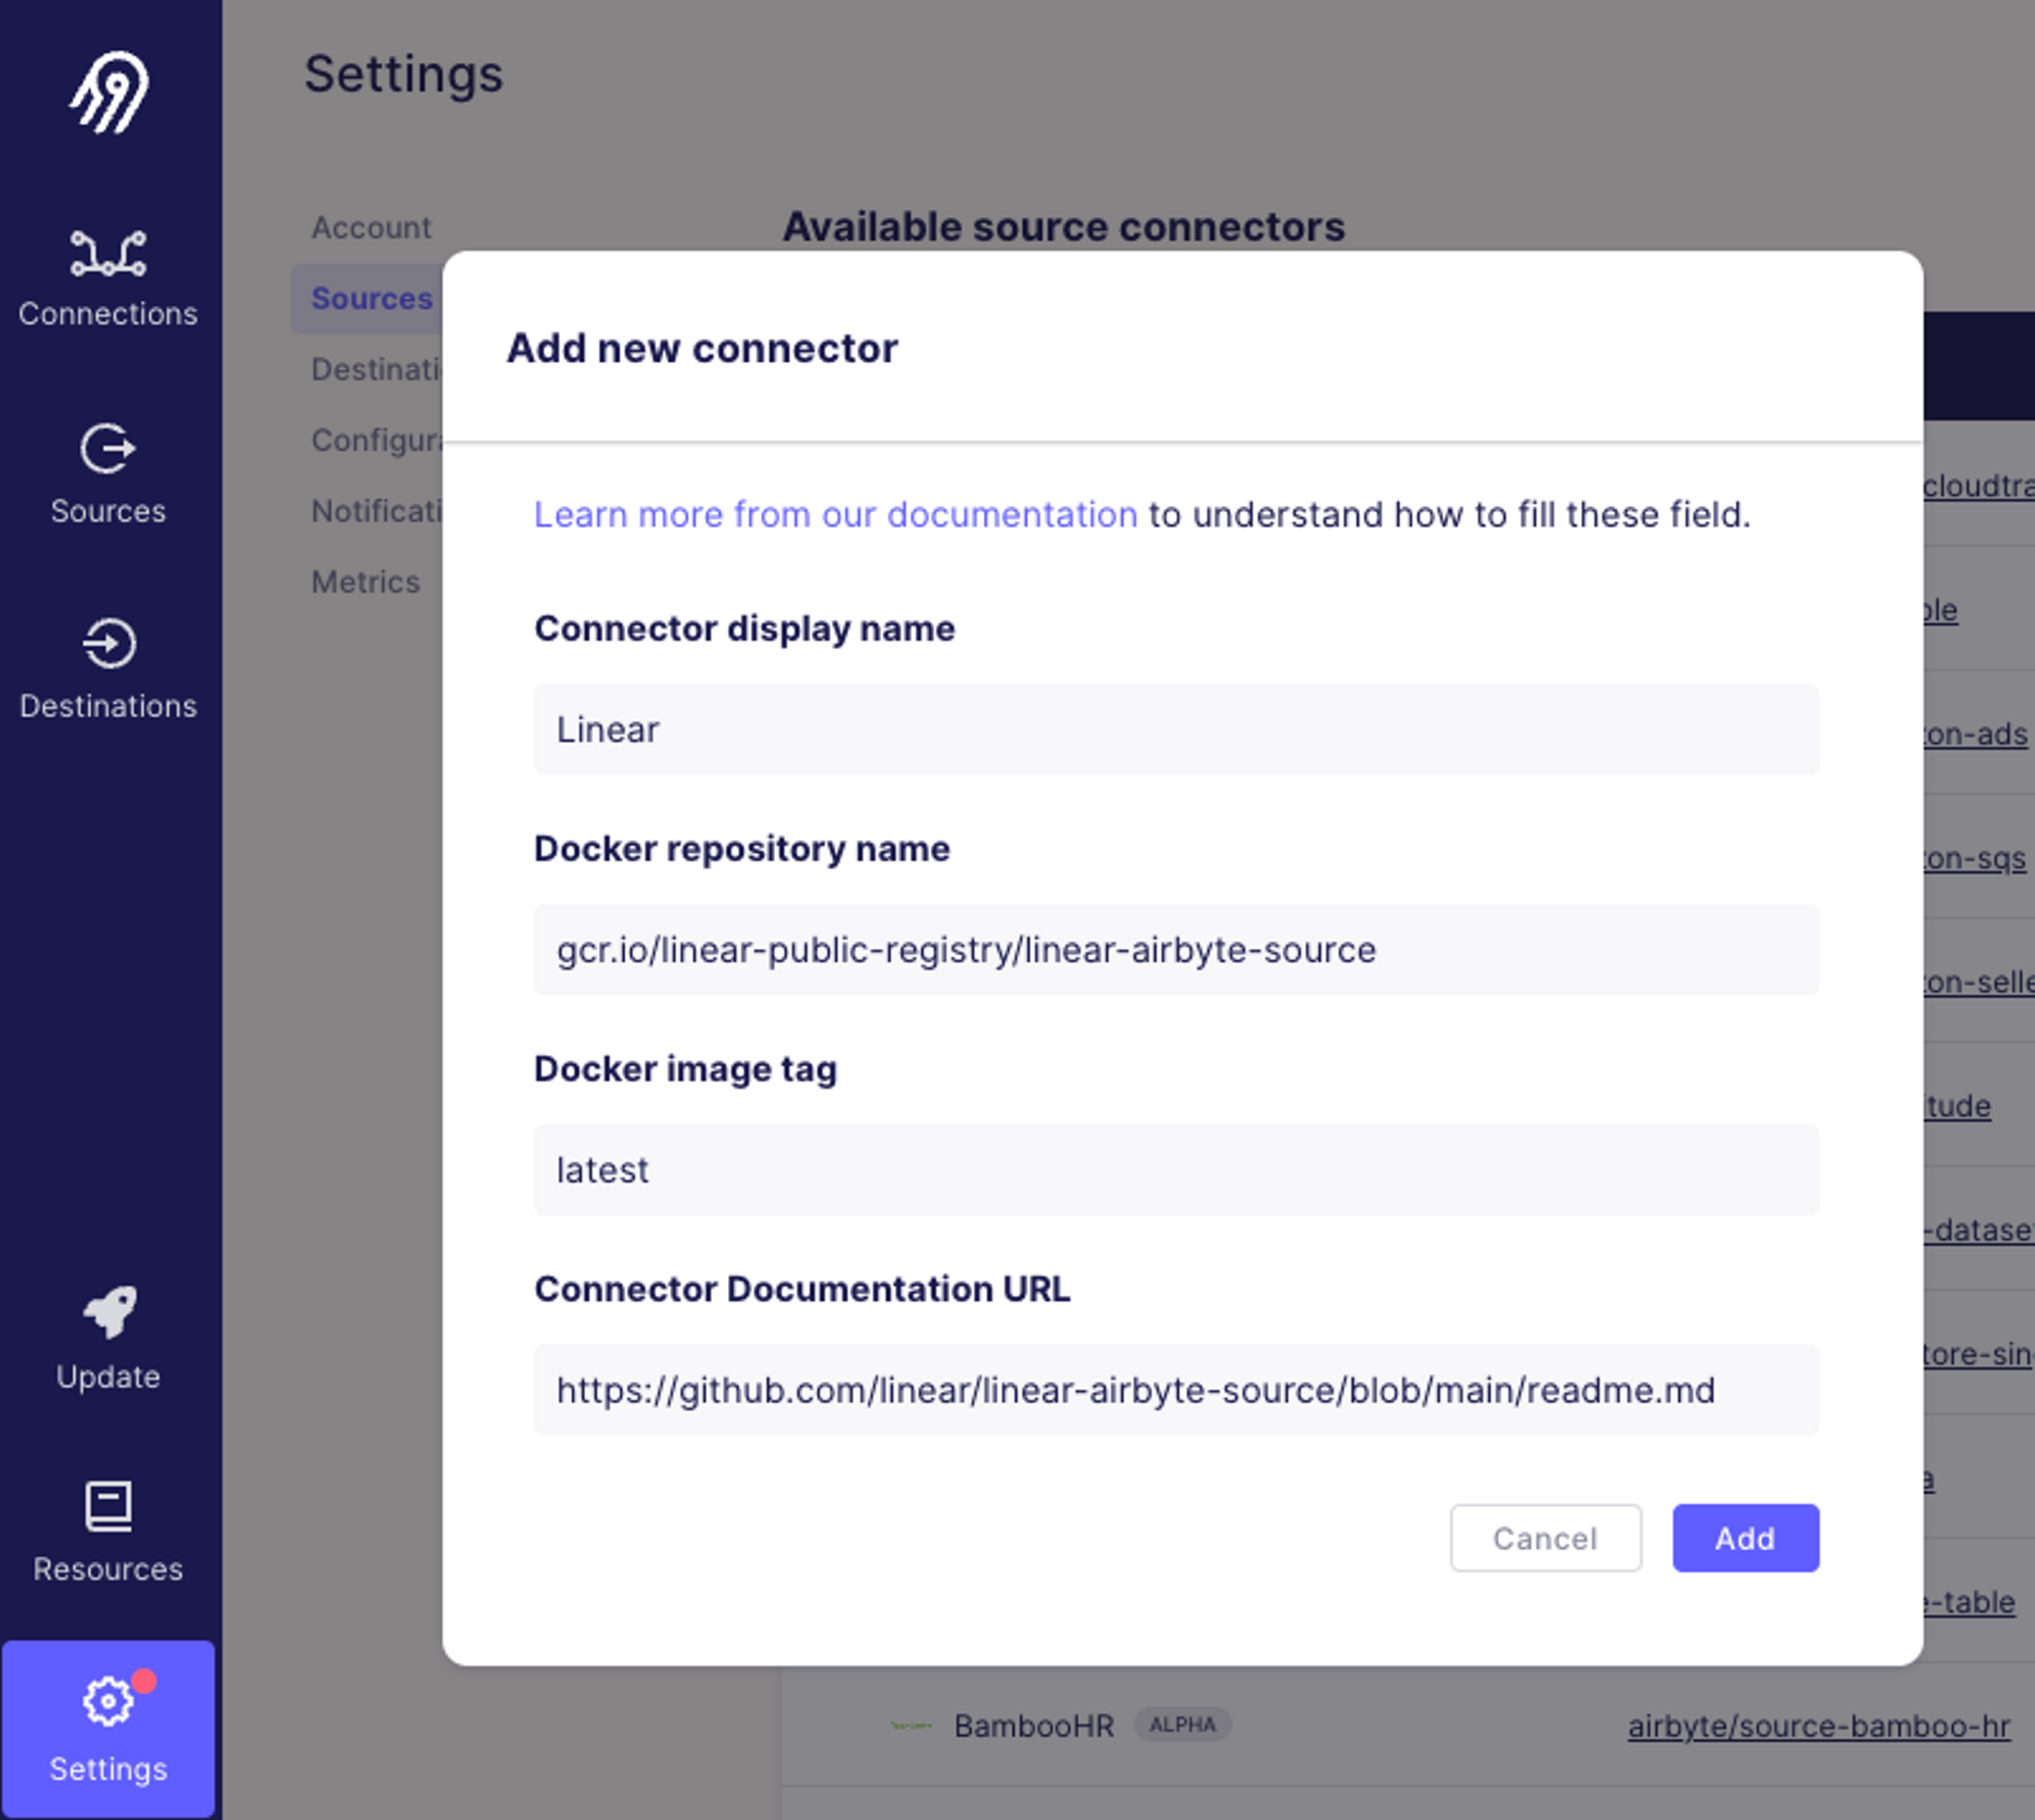 Settings page in Airbyte for adding a new connector